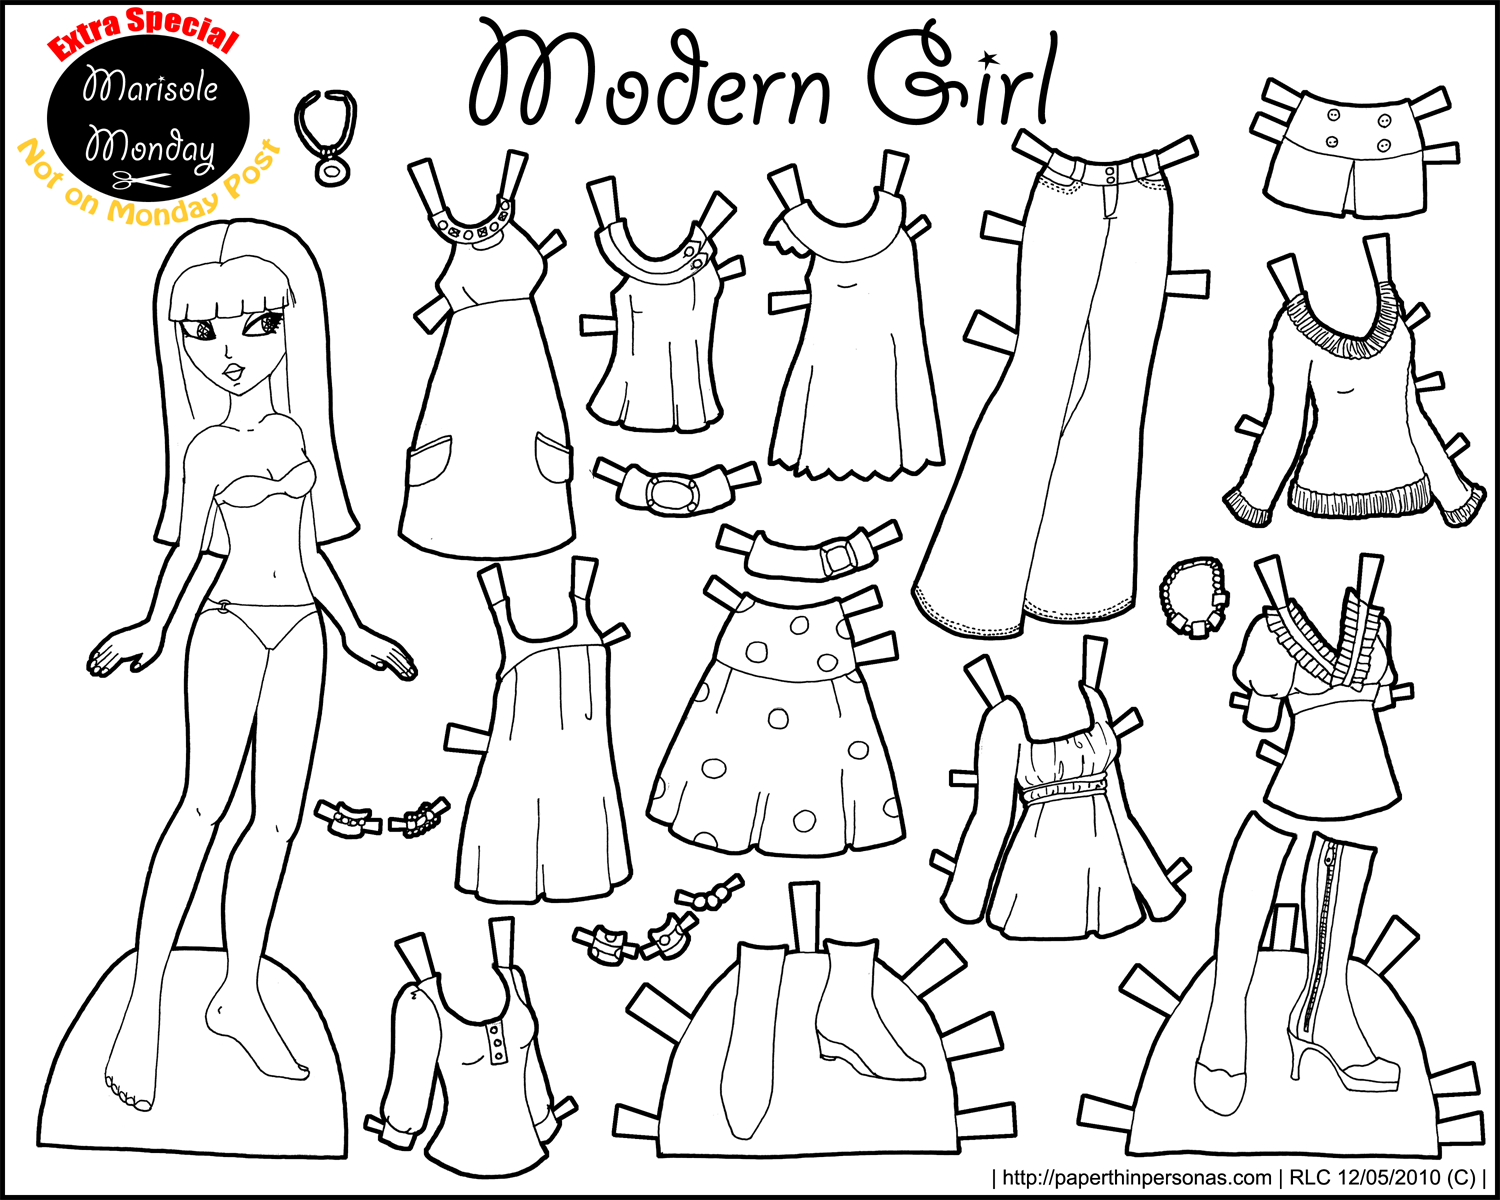 Black and White Printable Paper Doll from the Marisole Monday Series